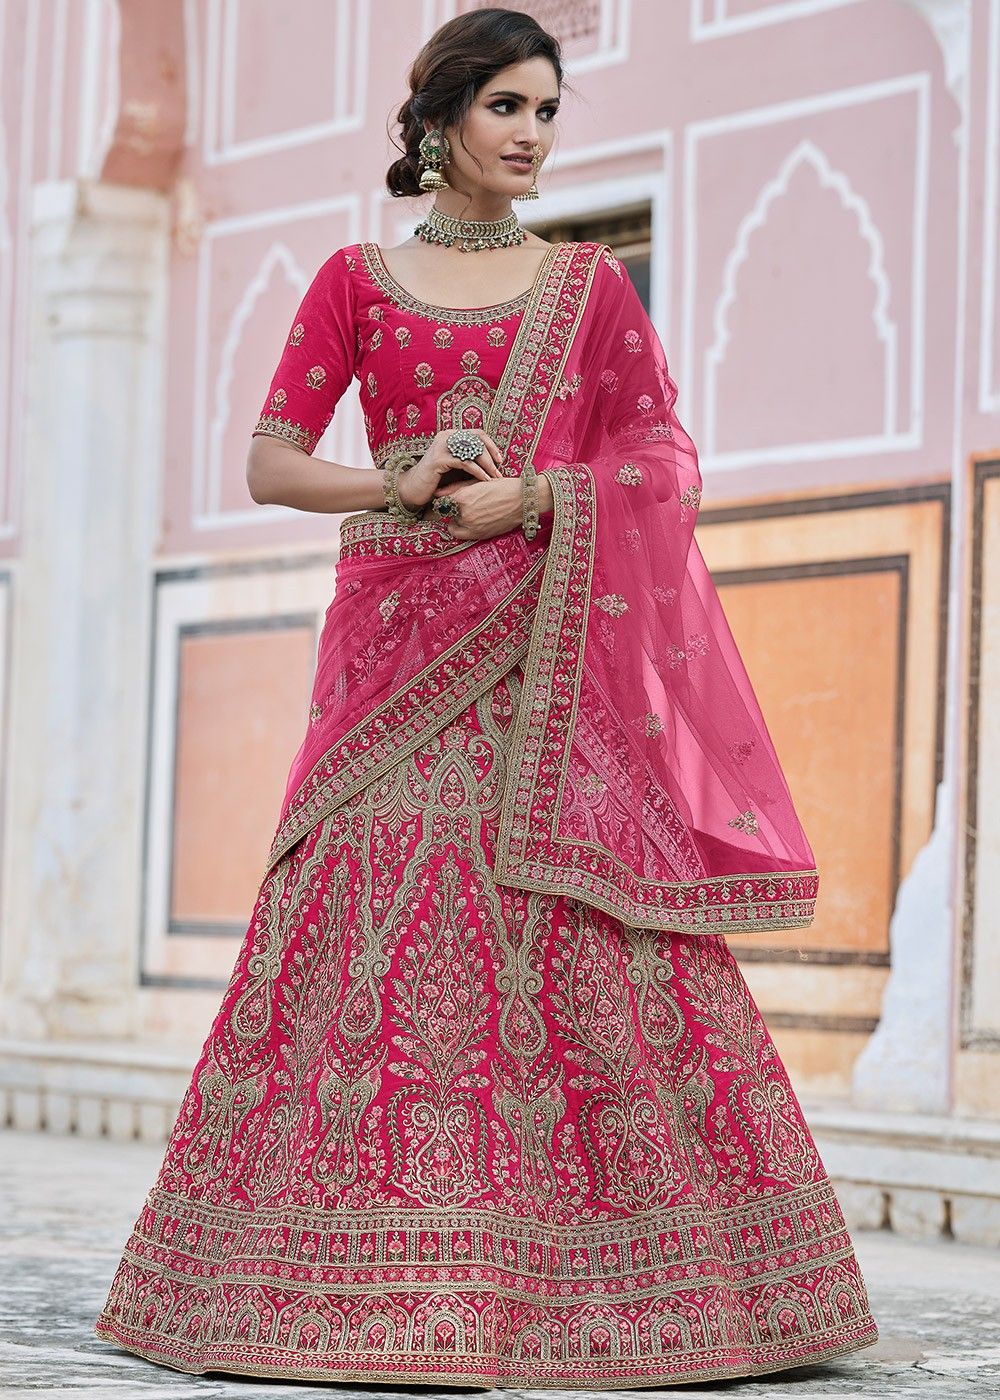 Wedding Party Outfits: Saris, Gowns, Jackets and Lehengas | Femina.in